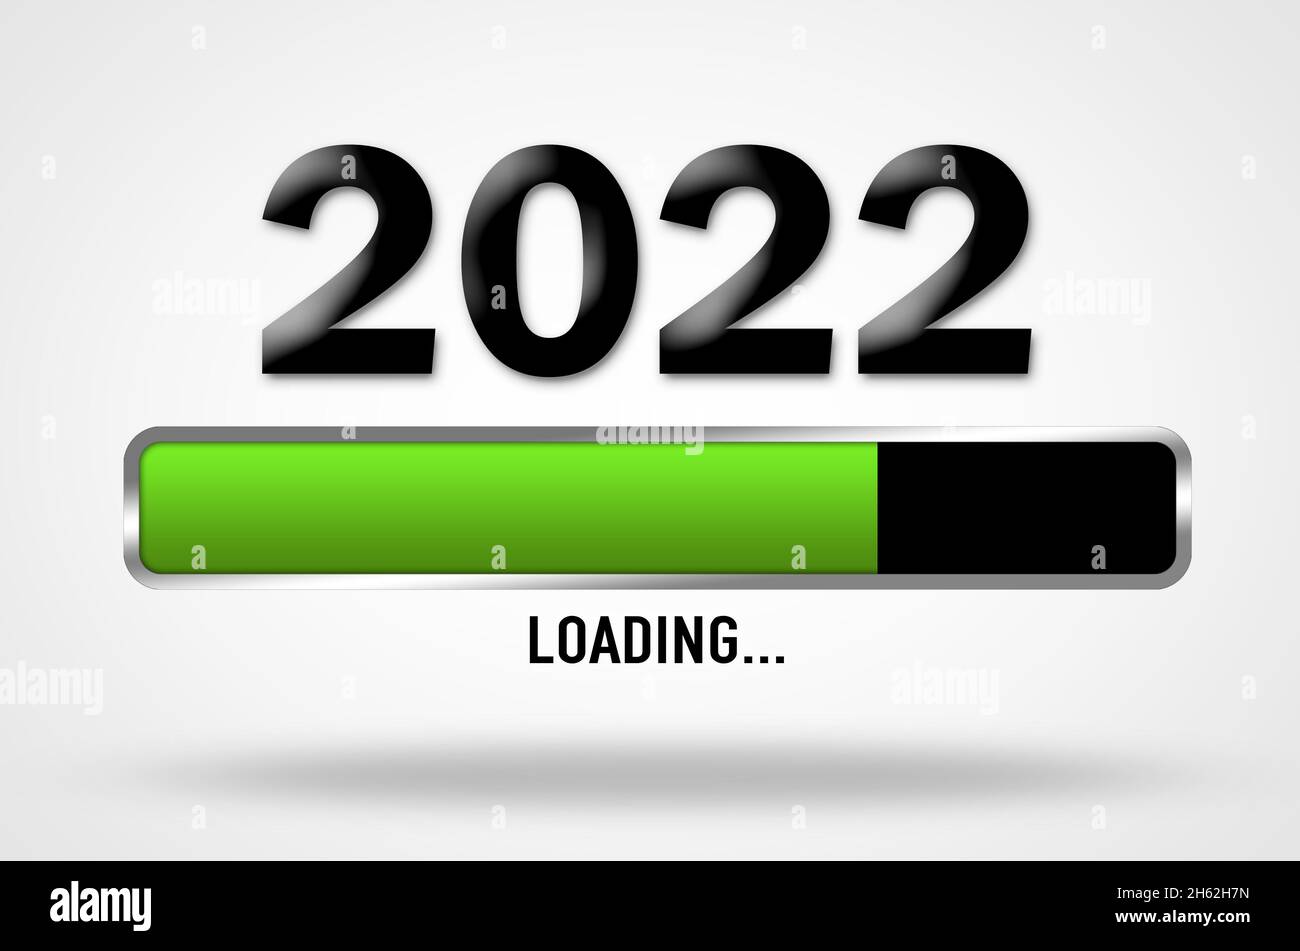 Loading bar illustration for the new year of 2022 Stock Photo